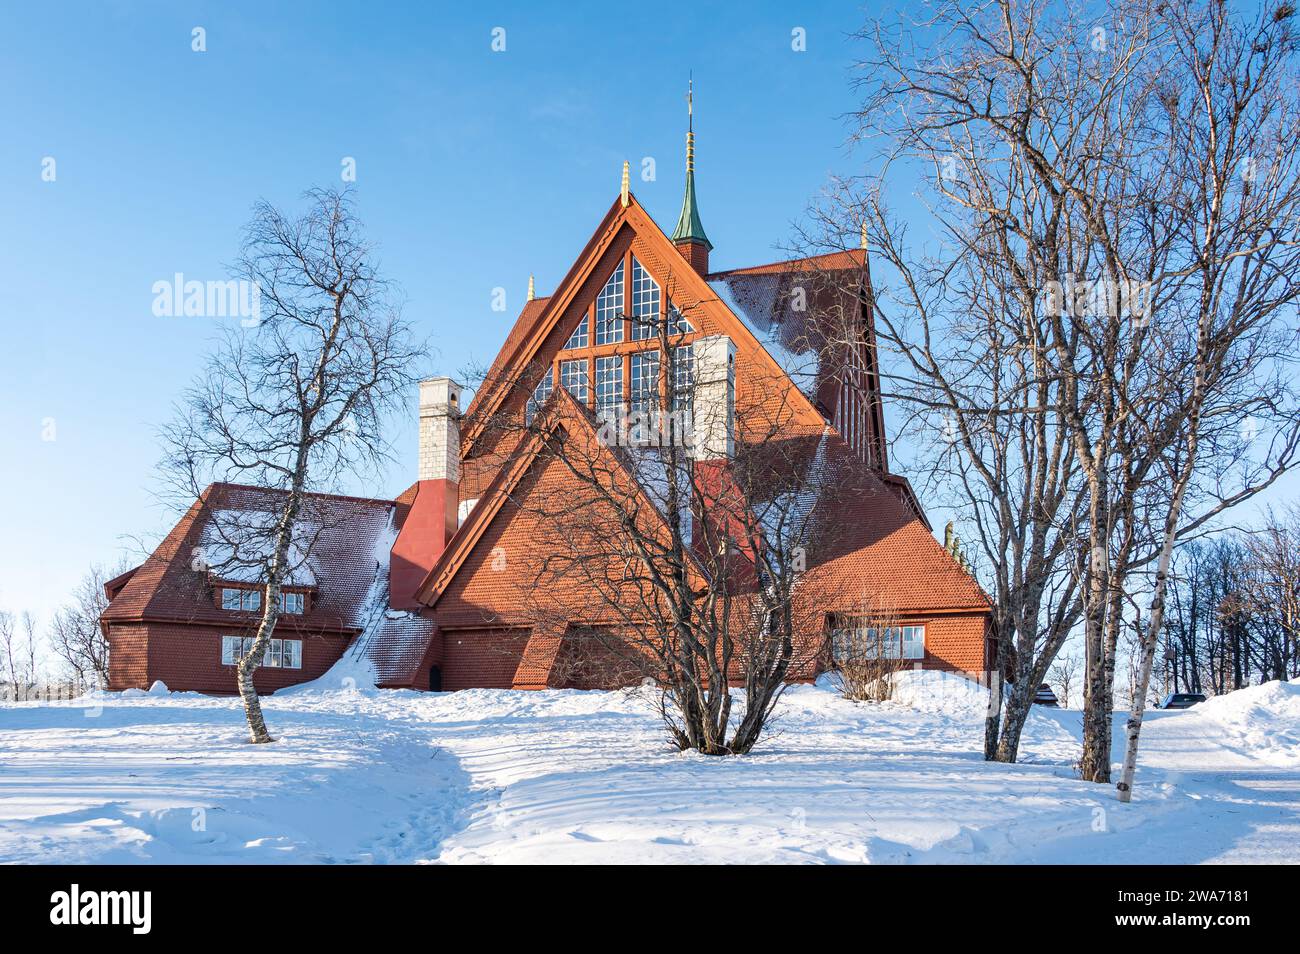 The beautiful wooden Kiruna Church in Kiruna, Sweden.  The church was built between 1909 and 1912, designed by the architect, Gustaf Wickman. Stock Photo